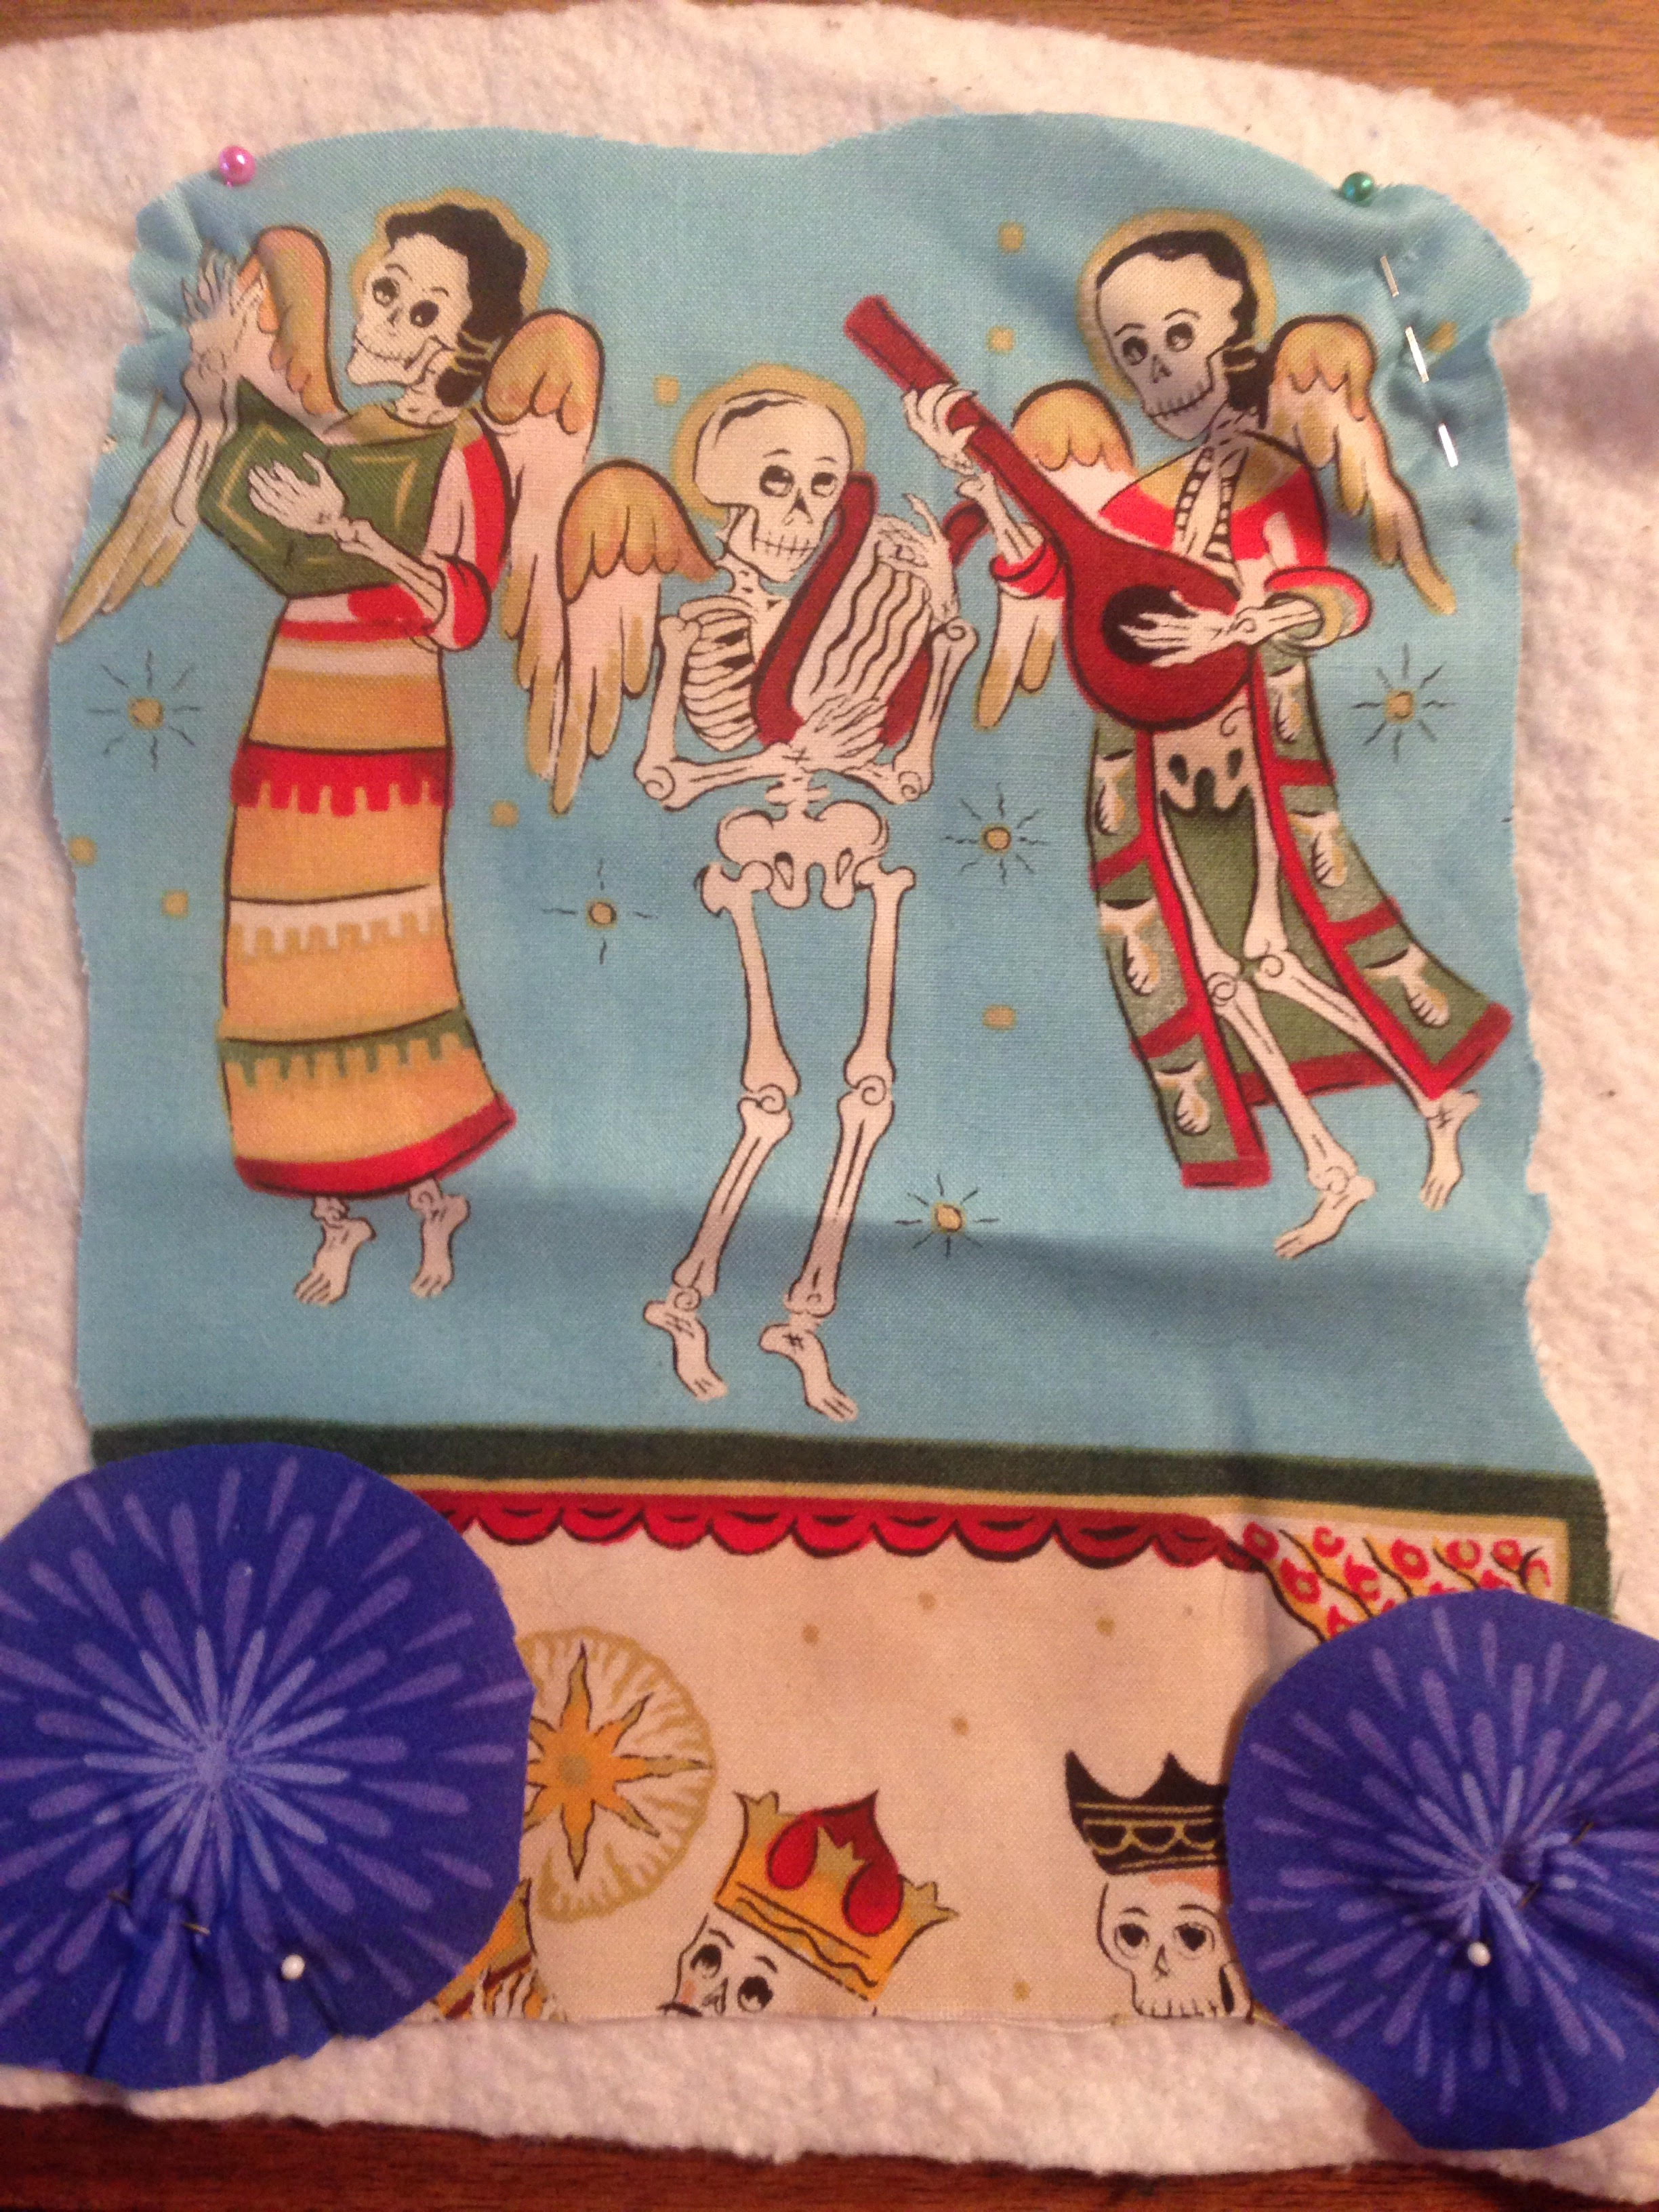 Small piece of fabric illustrating skull figures as angels playing musical instruments